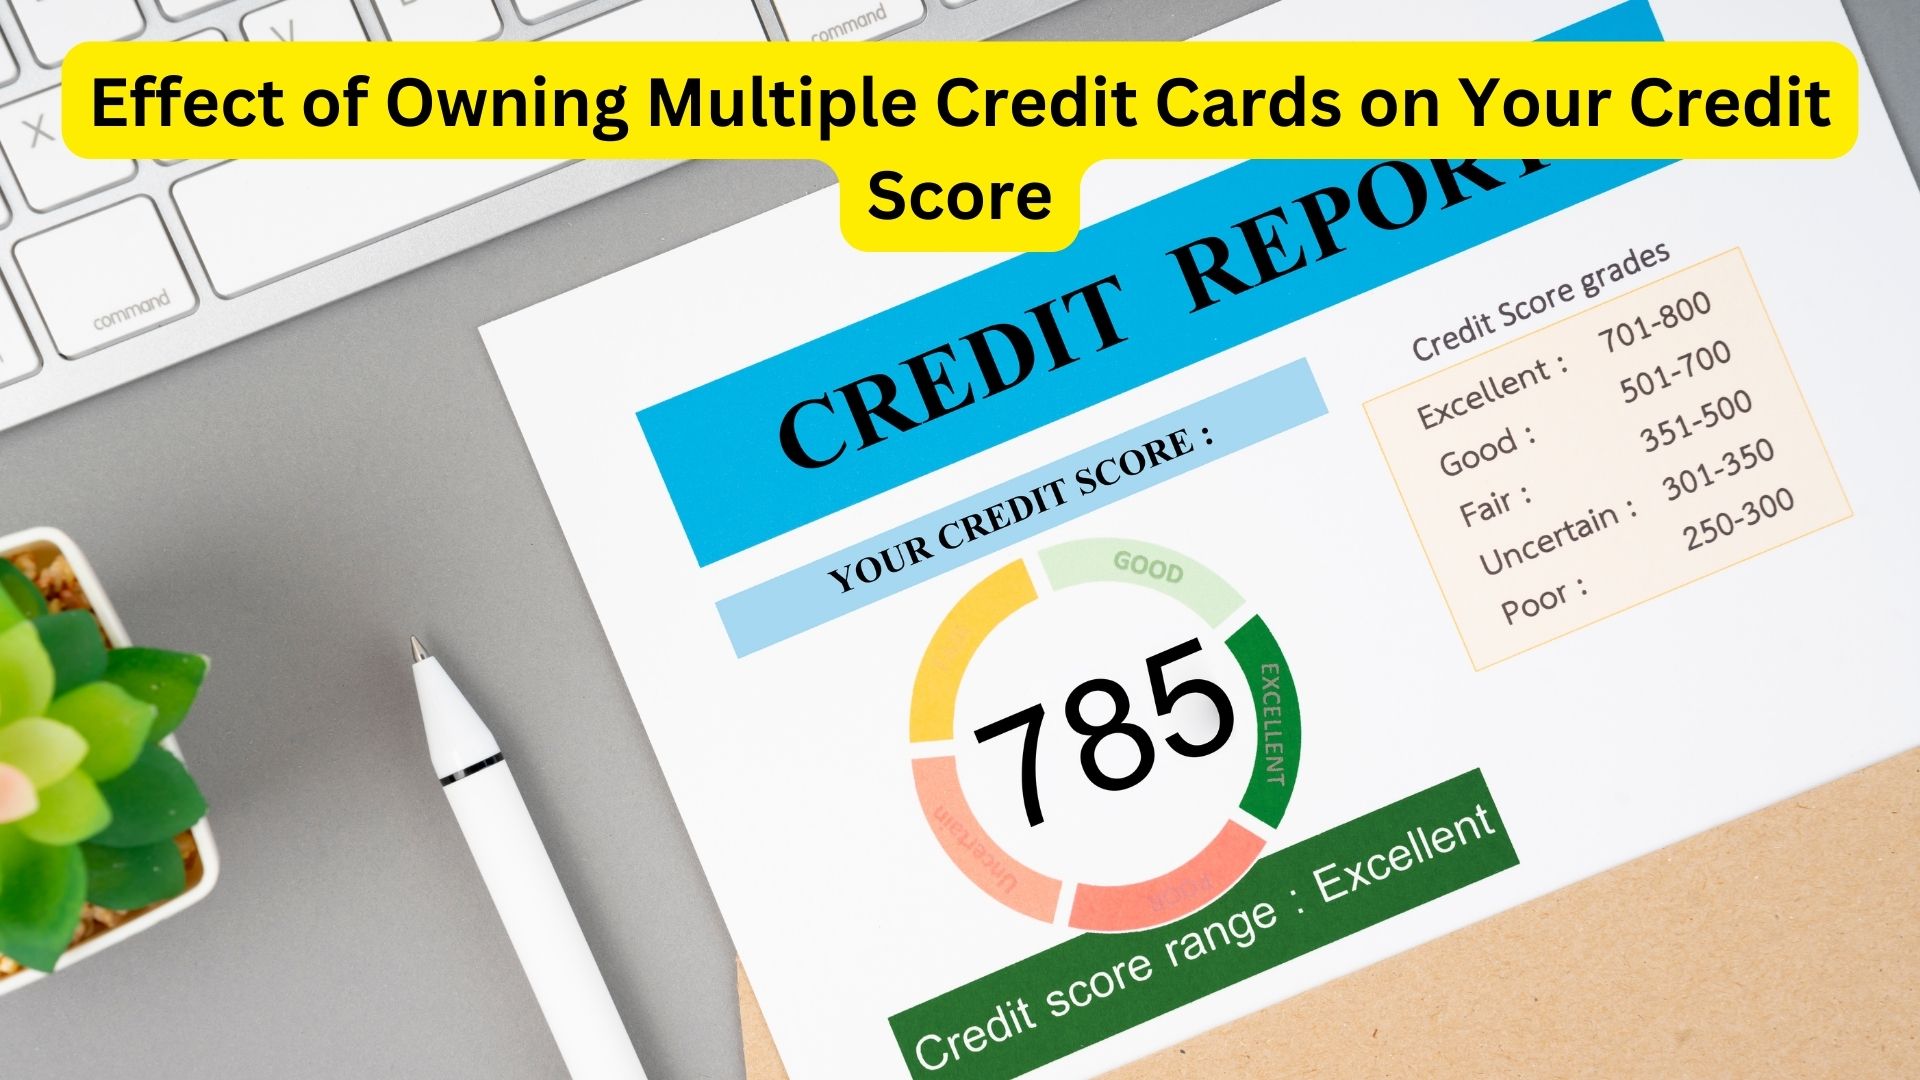 Effect of Owning Multiple Credit Cards on Your Credit Score